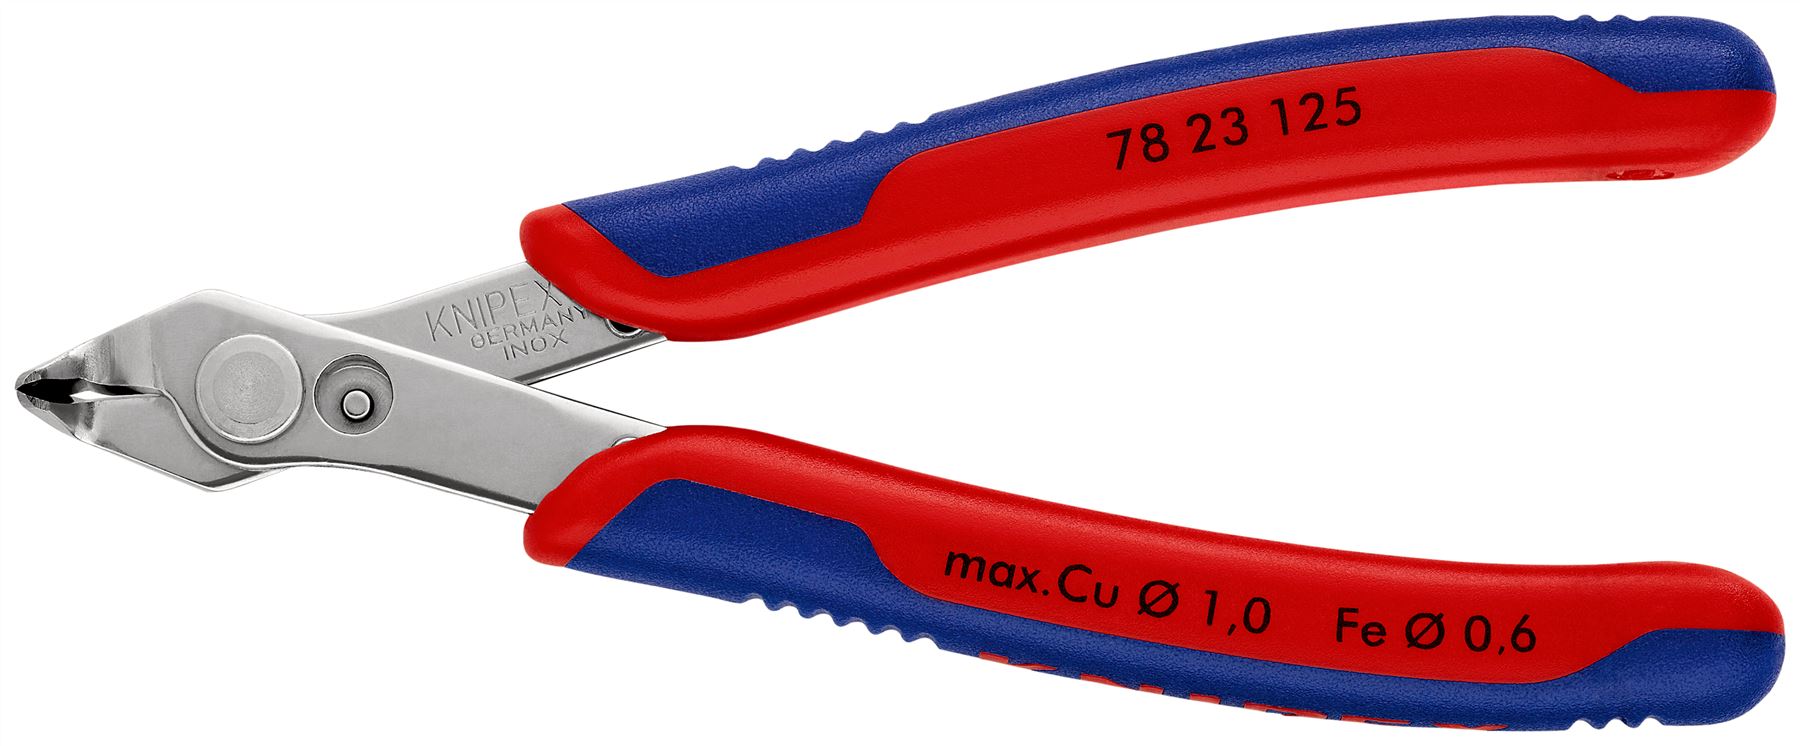 KNIPEX Electronics Super Knips Precision Cutting Pliers 60° Angled Head 125mm Multi Component Grips 78 13 125